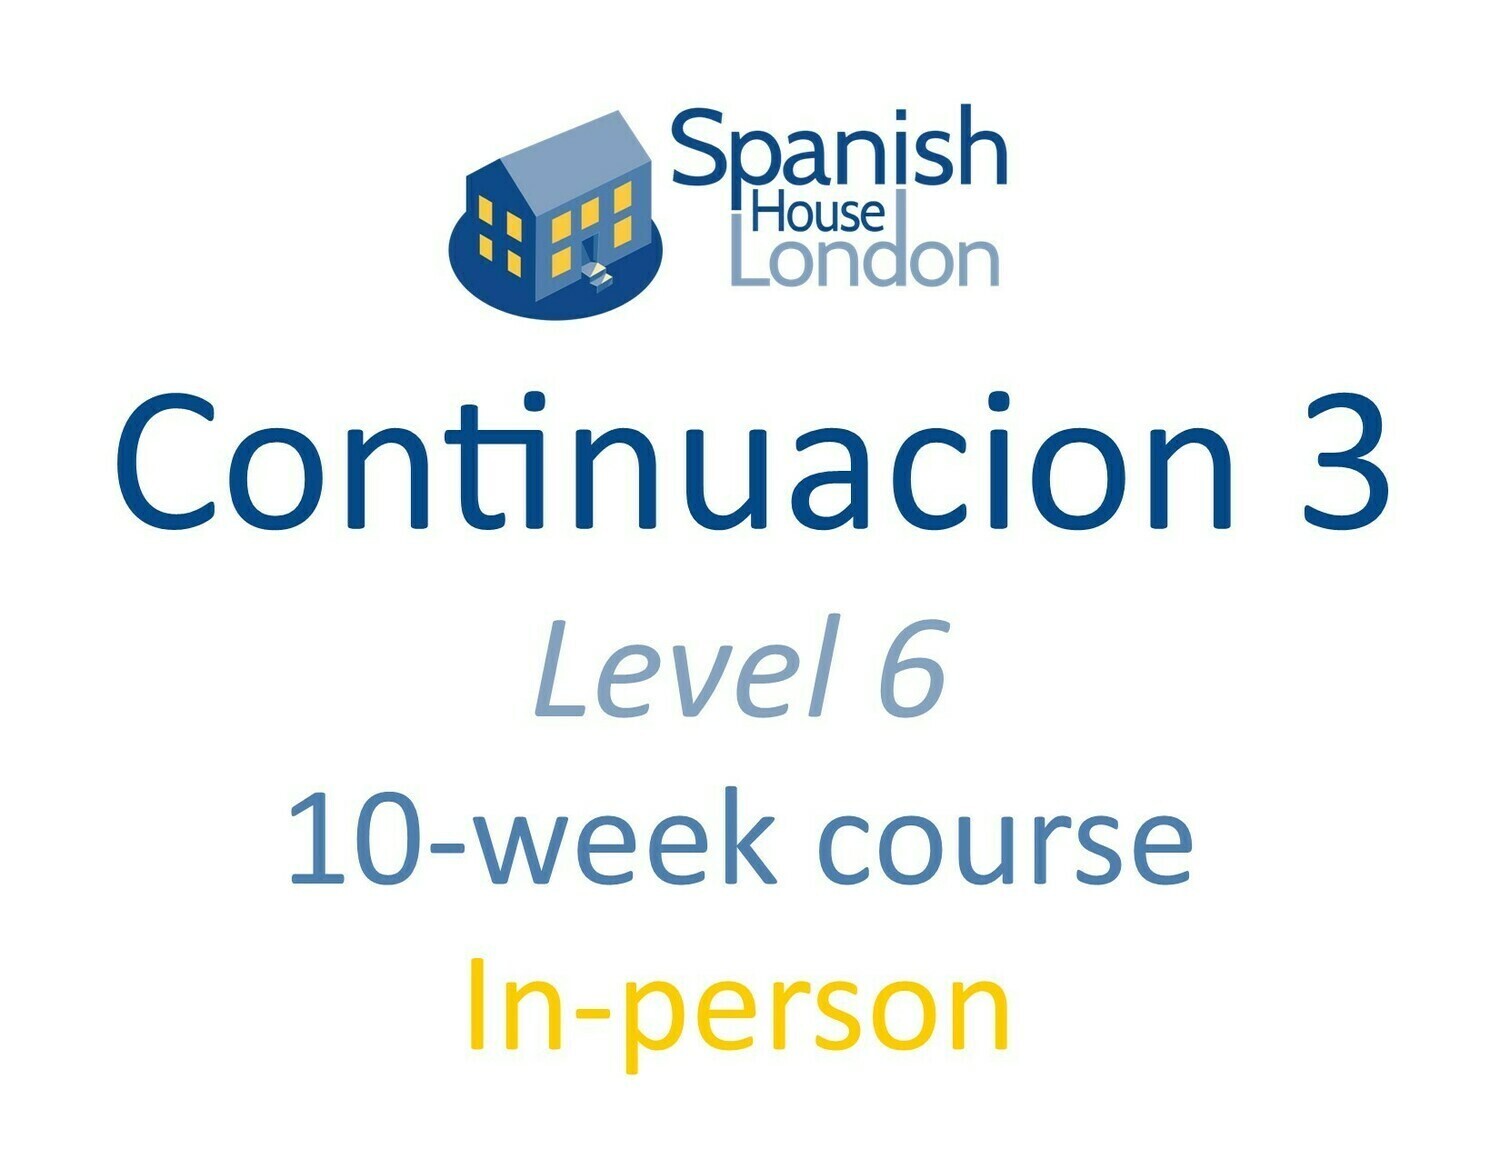 Continuación 3 Course starting on 29th April at 7.30pm in Clapham North